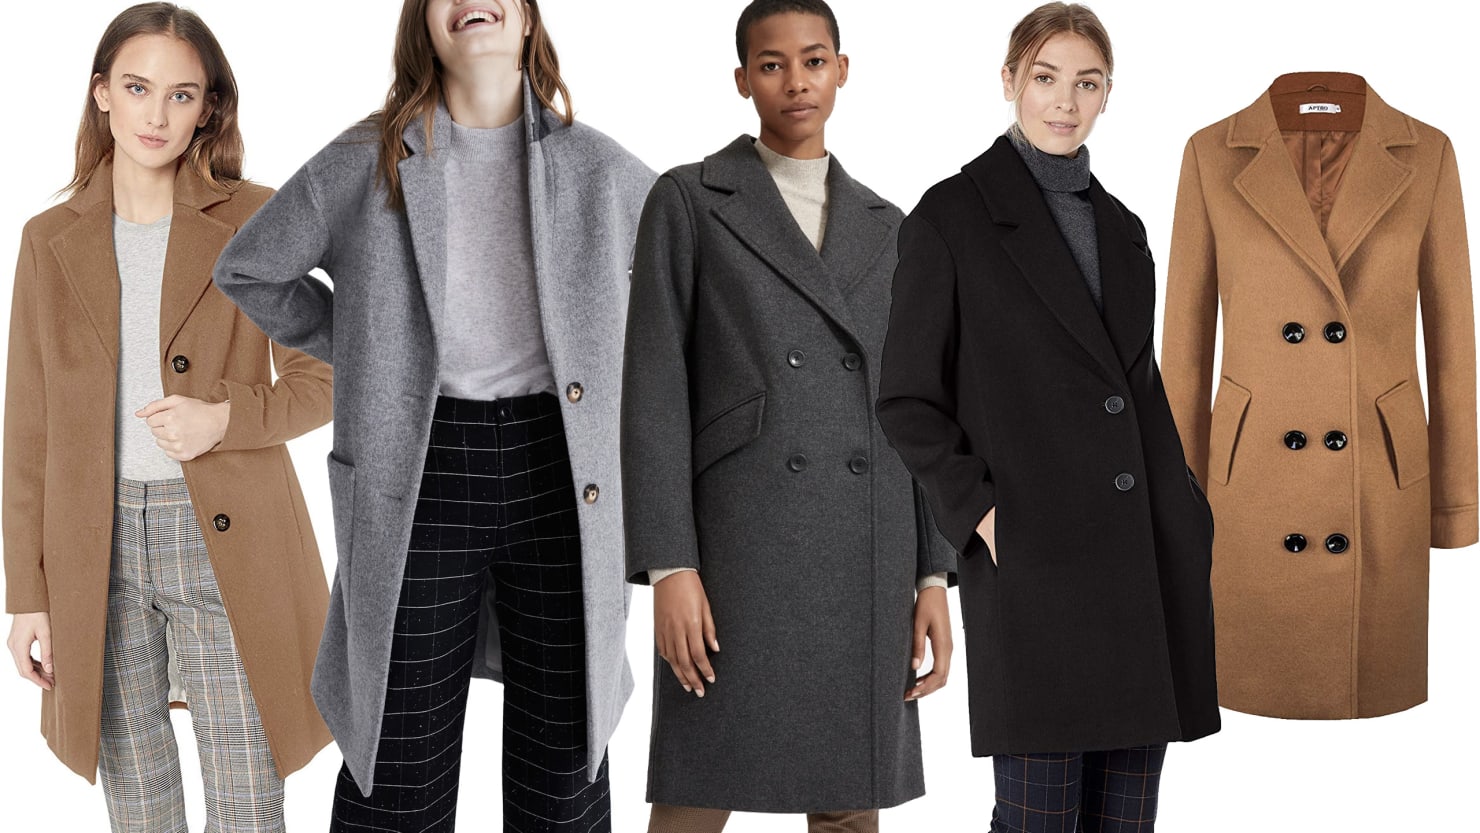 The Best Women’s Wool Overcoats to Look Good and Stay Warm In